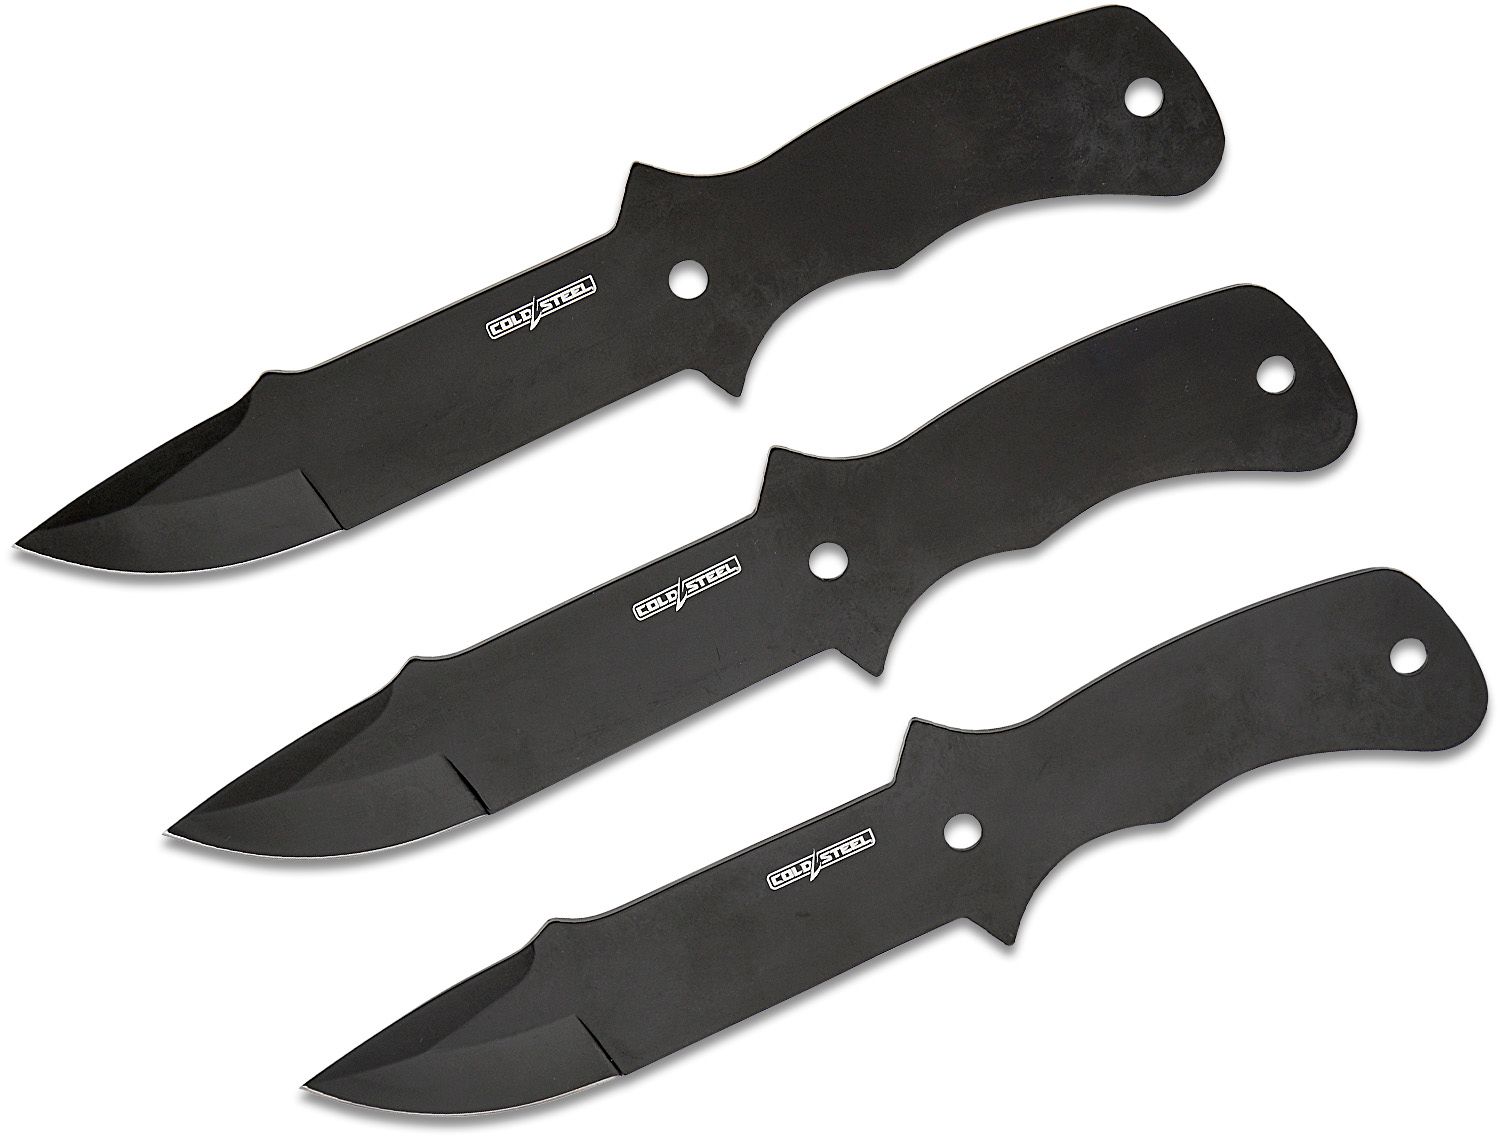 8.5 Black Stainless Steel Perfectly Balanced Throwing Knife W/ Sheath